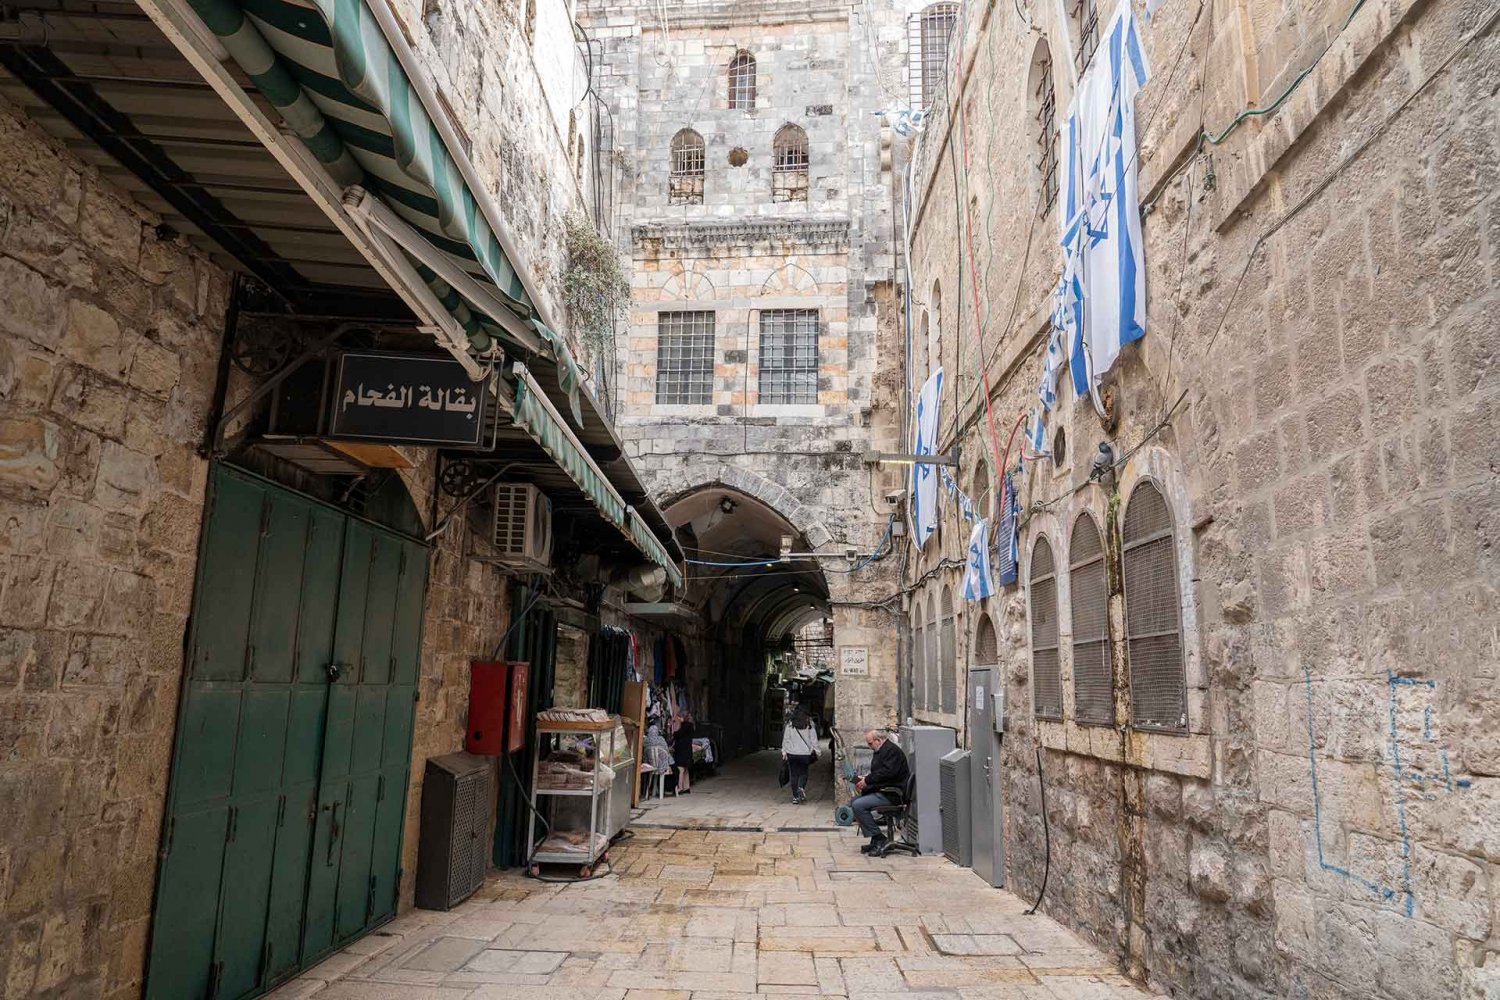 Activity in Jerusalem's Old City has ground to a halt since Israel declared war on Gaza in October.